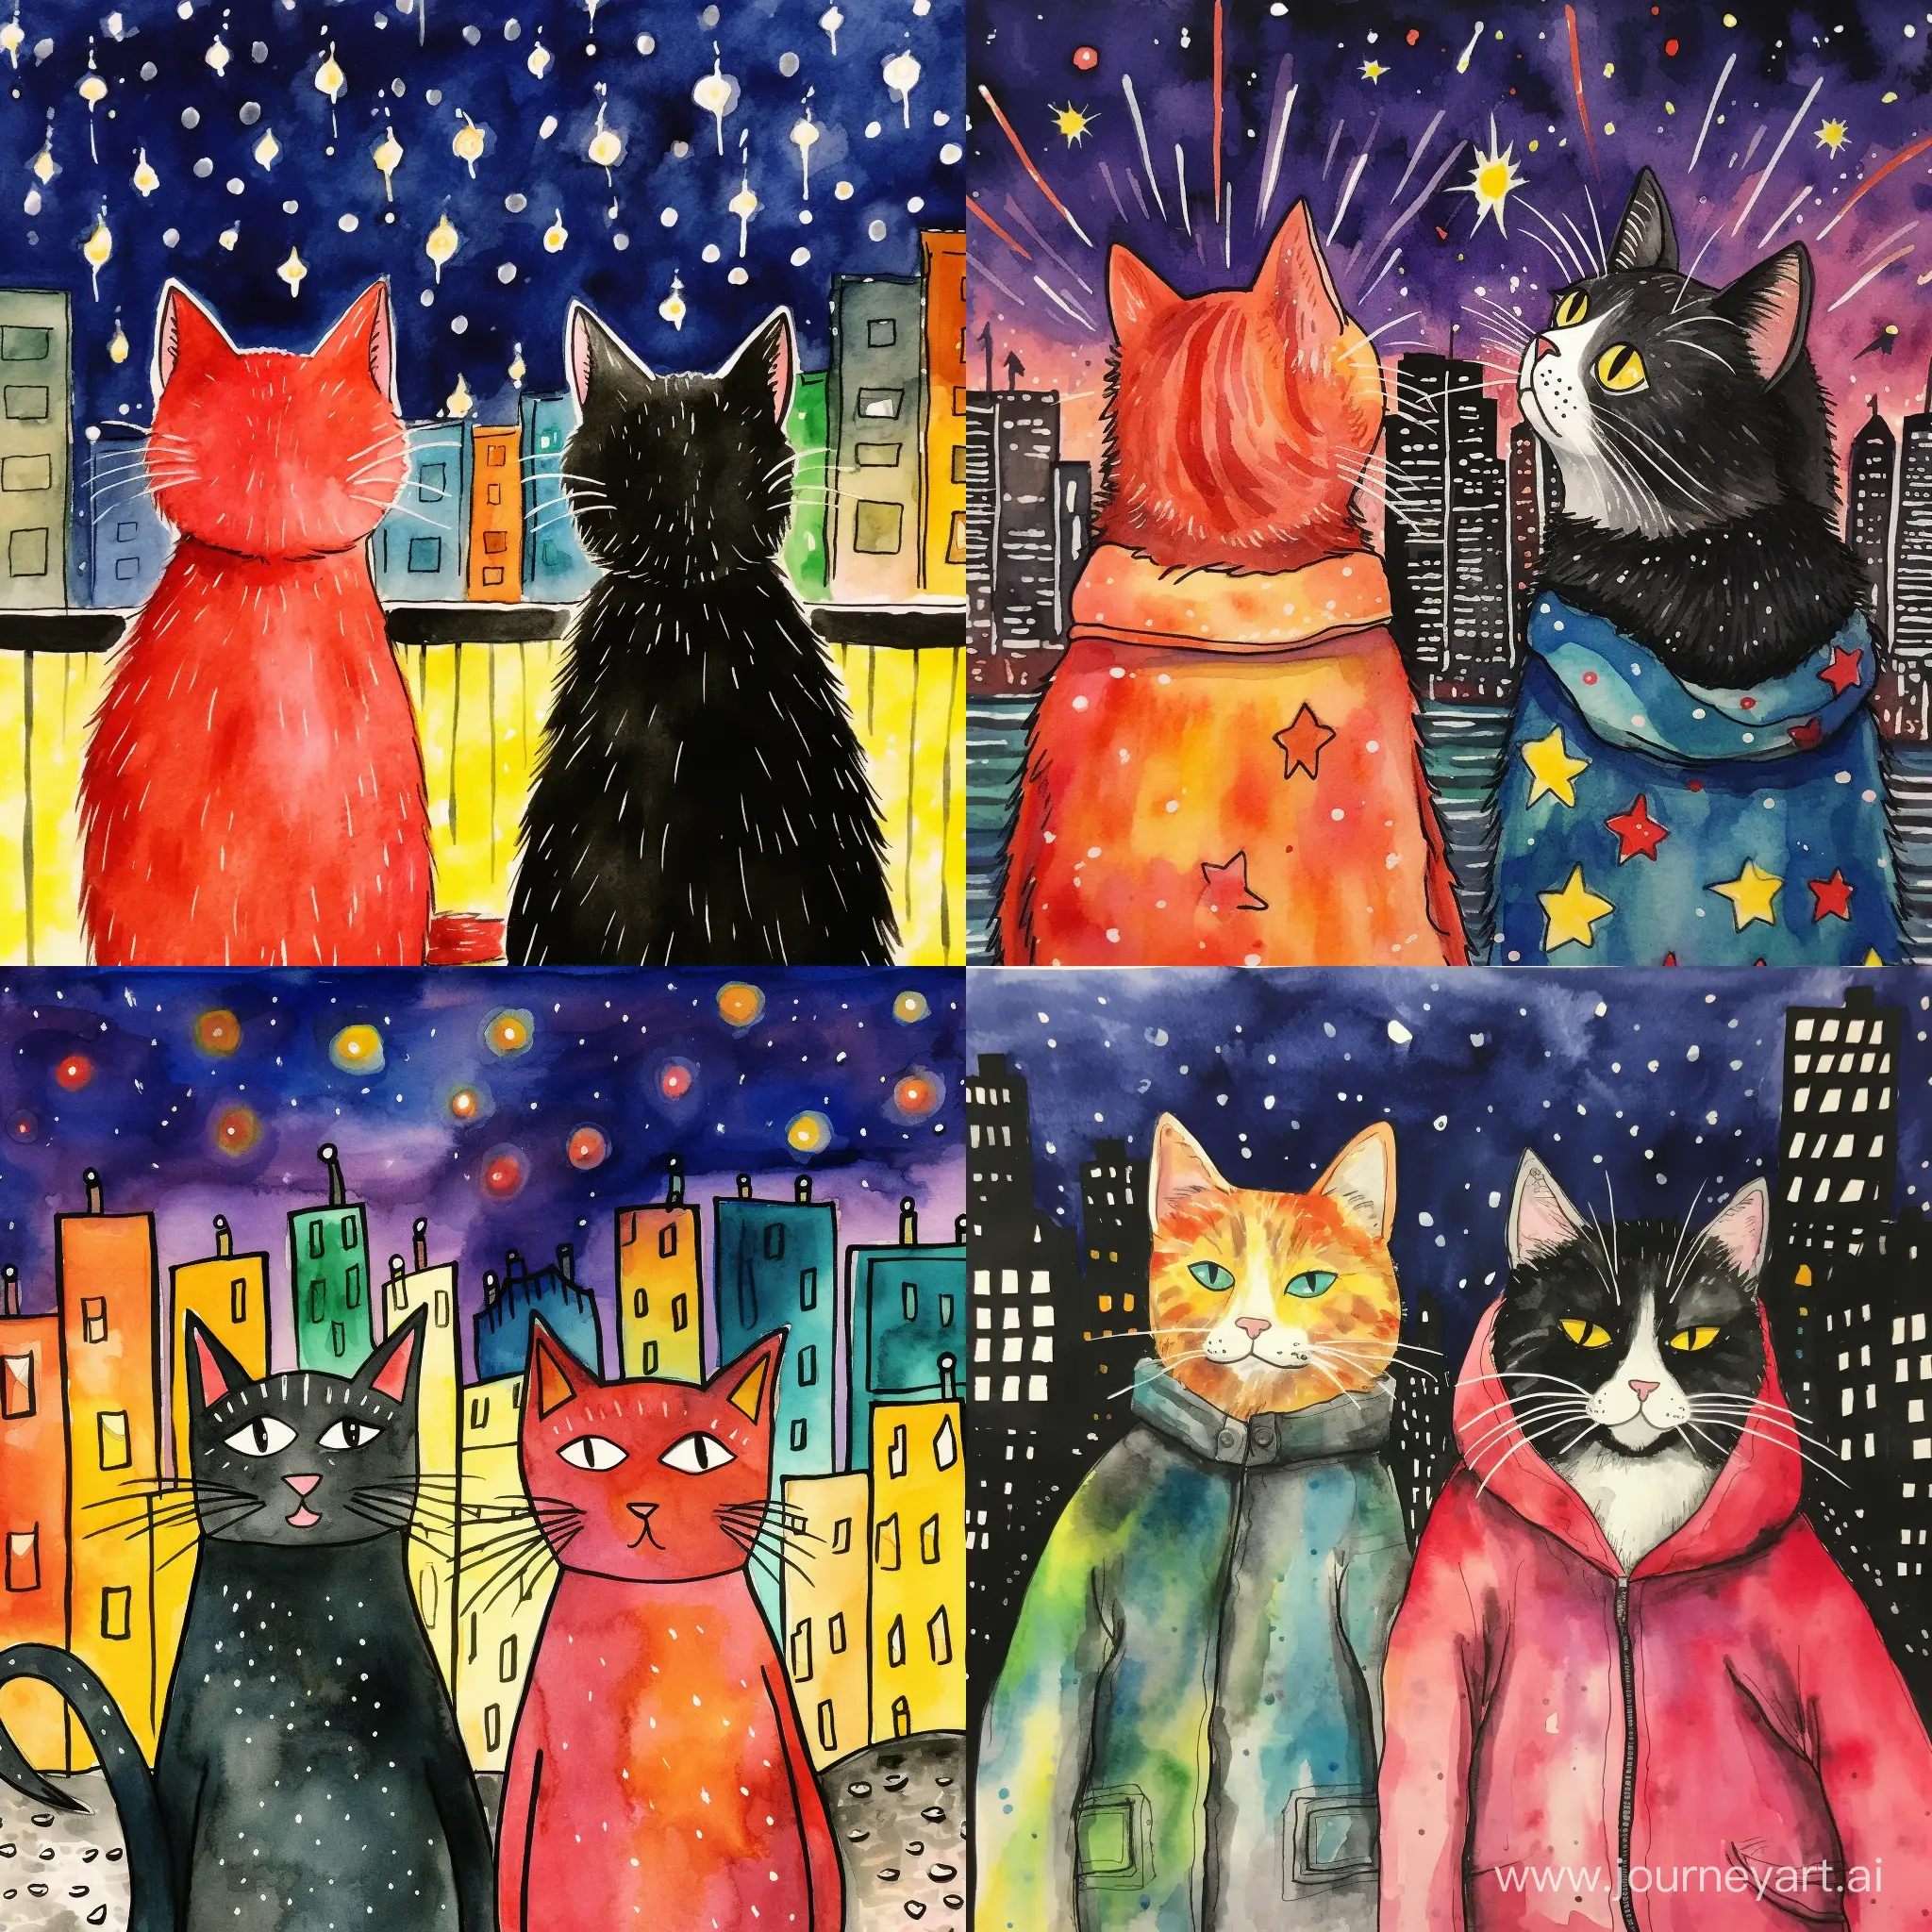 Festive-Felines-in-Colorful-New-Years-Eve-Celebration